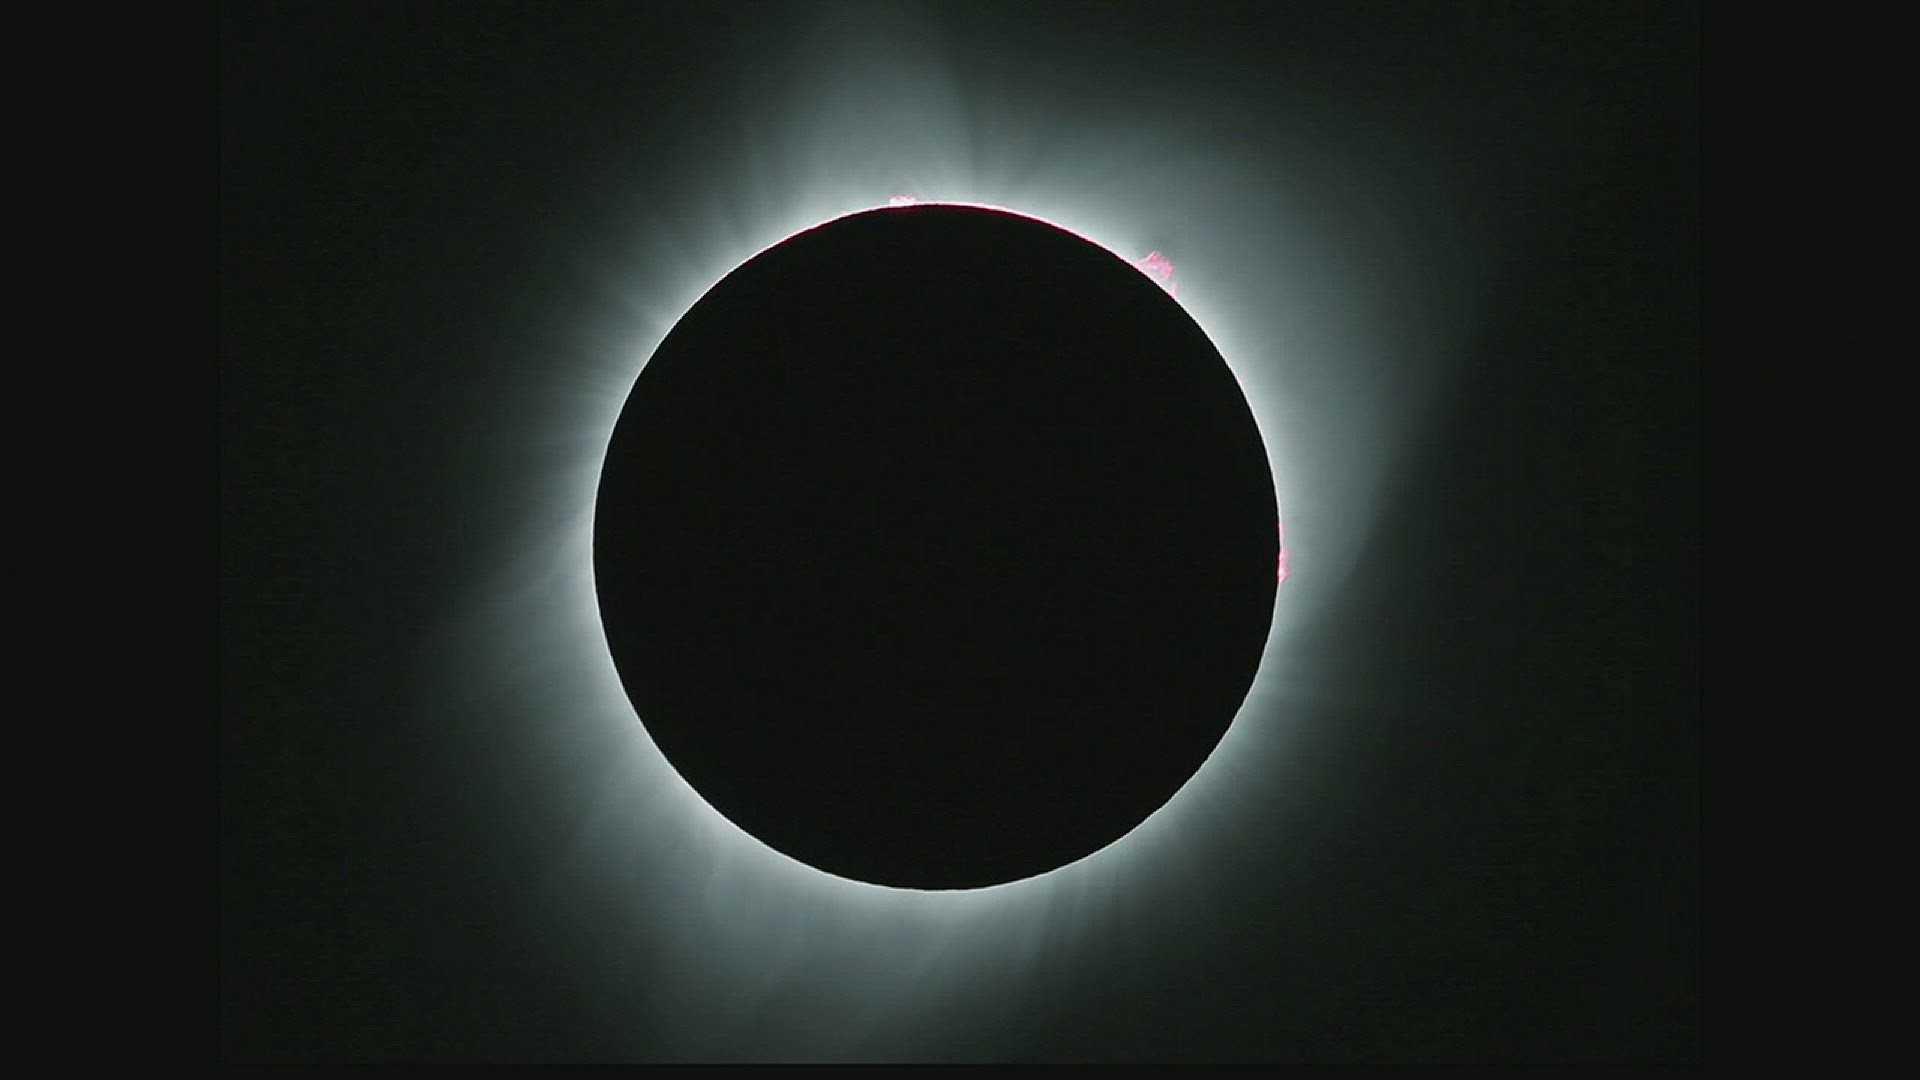 We're one month out from the April 8 total solar eclipse. Today in St. Louis spoke with an expert at NASA about what to expect.